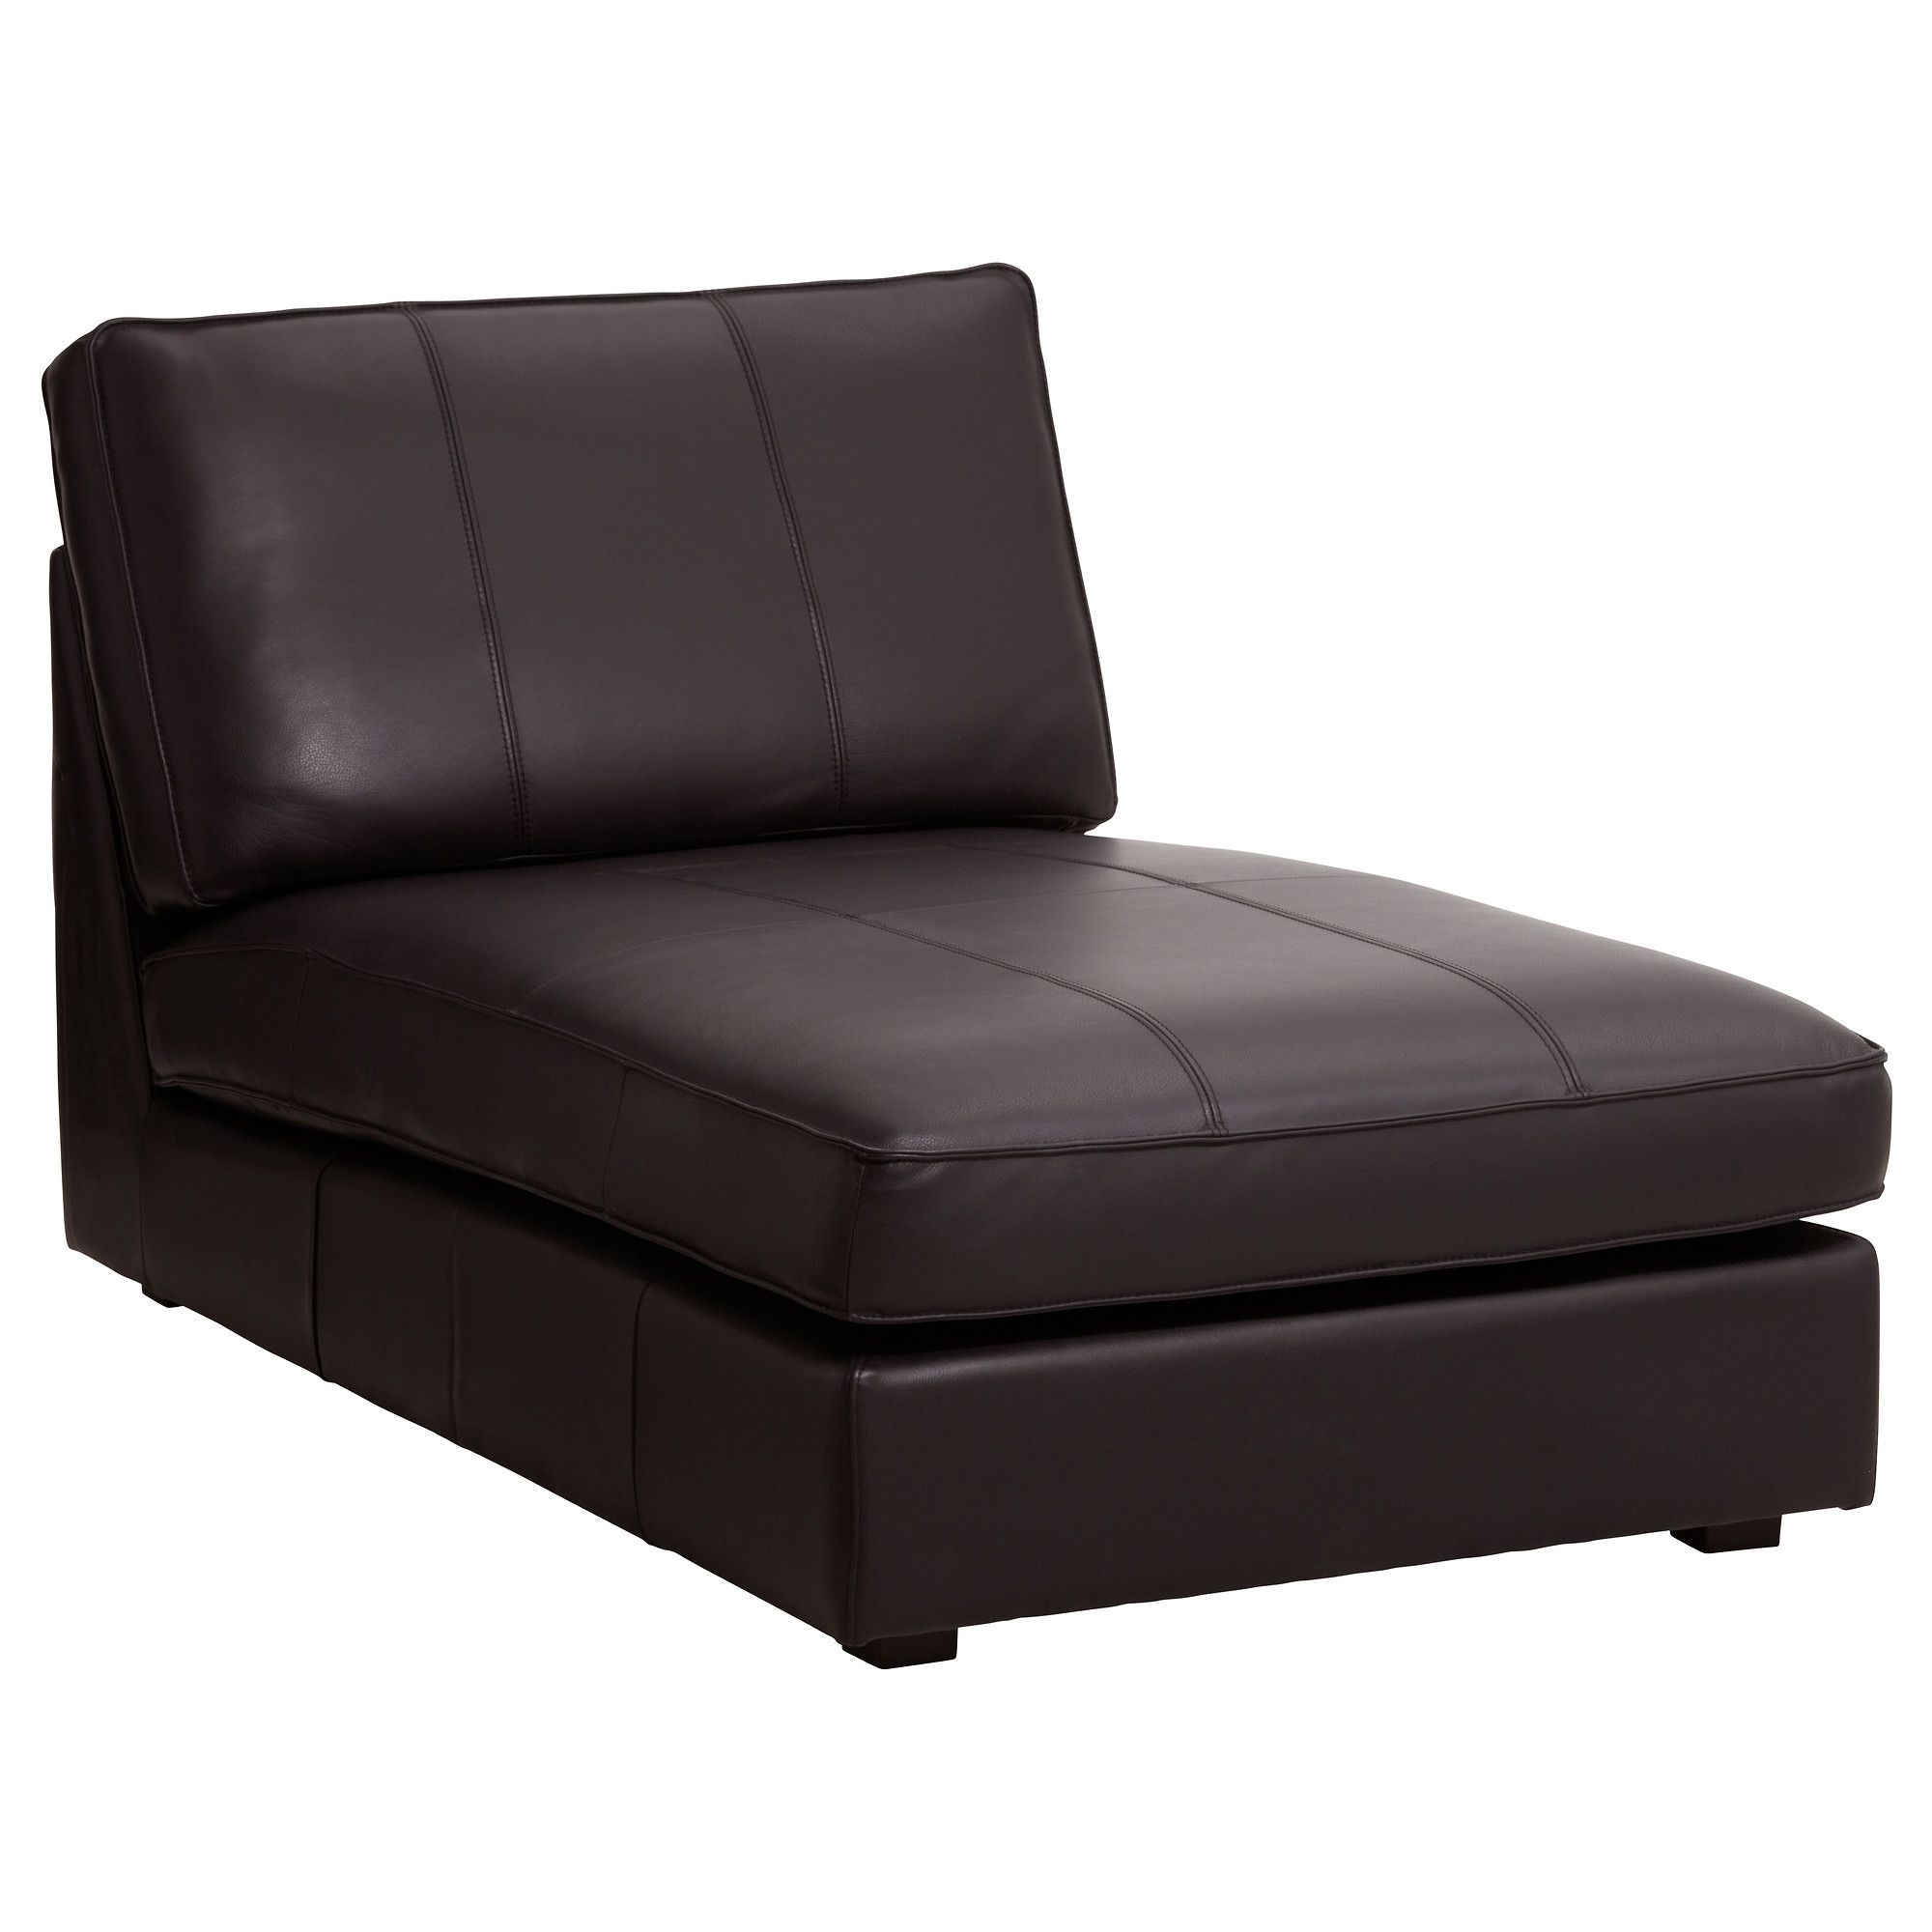 Kivik Chaise Longue – Grann/bomstad Black – Ikea Throughout Most Current Ikea Chaise Longues (View 3 of 15)